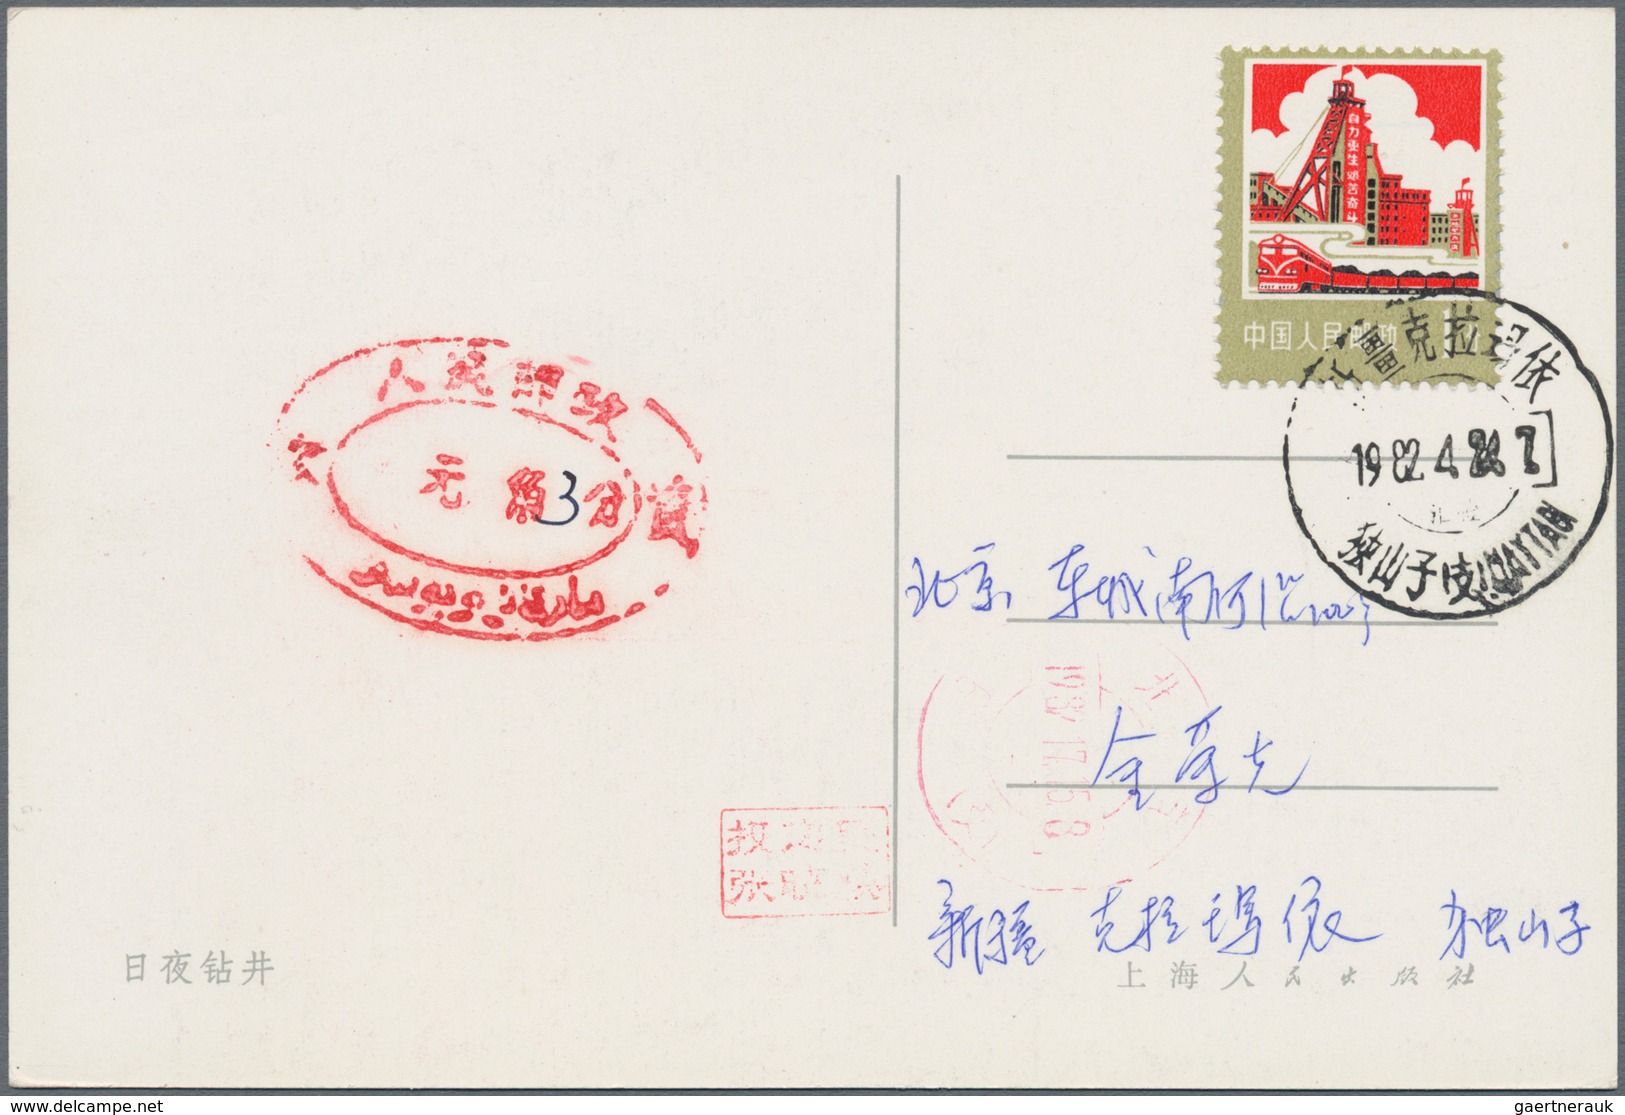 China - Volksrepublik - Portomarken: 1952/88 (ca.), approx. 78 covers and postcards all postage due,